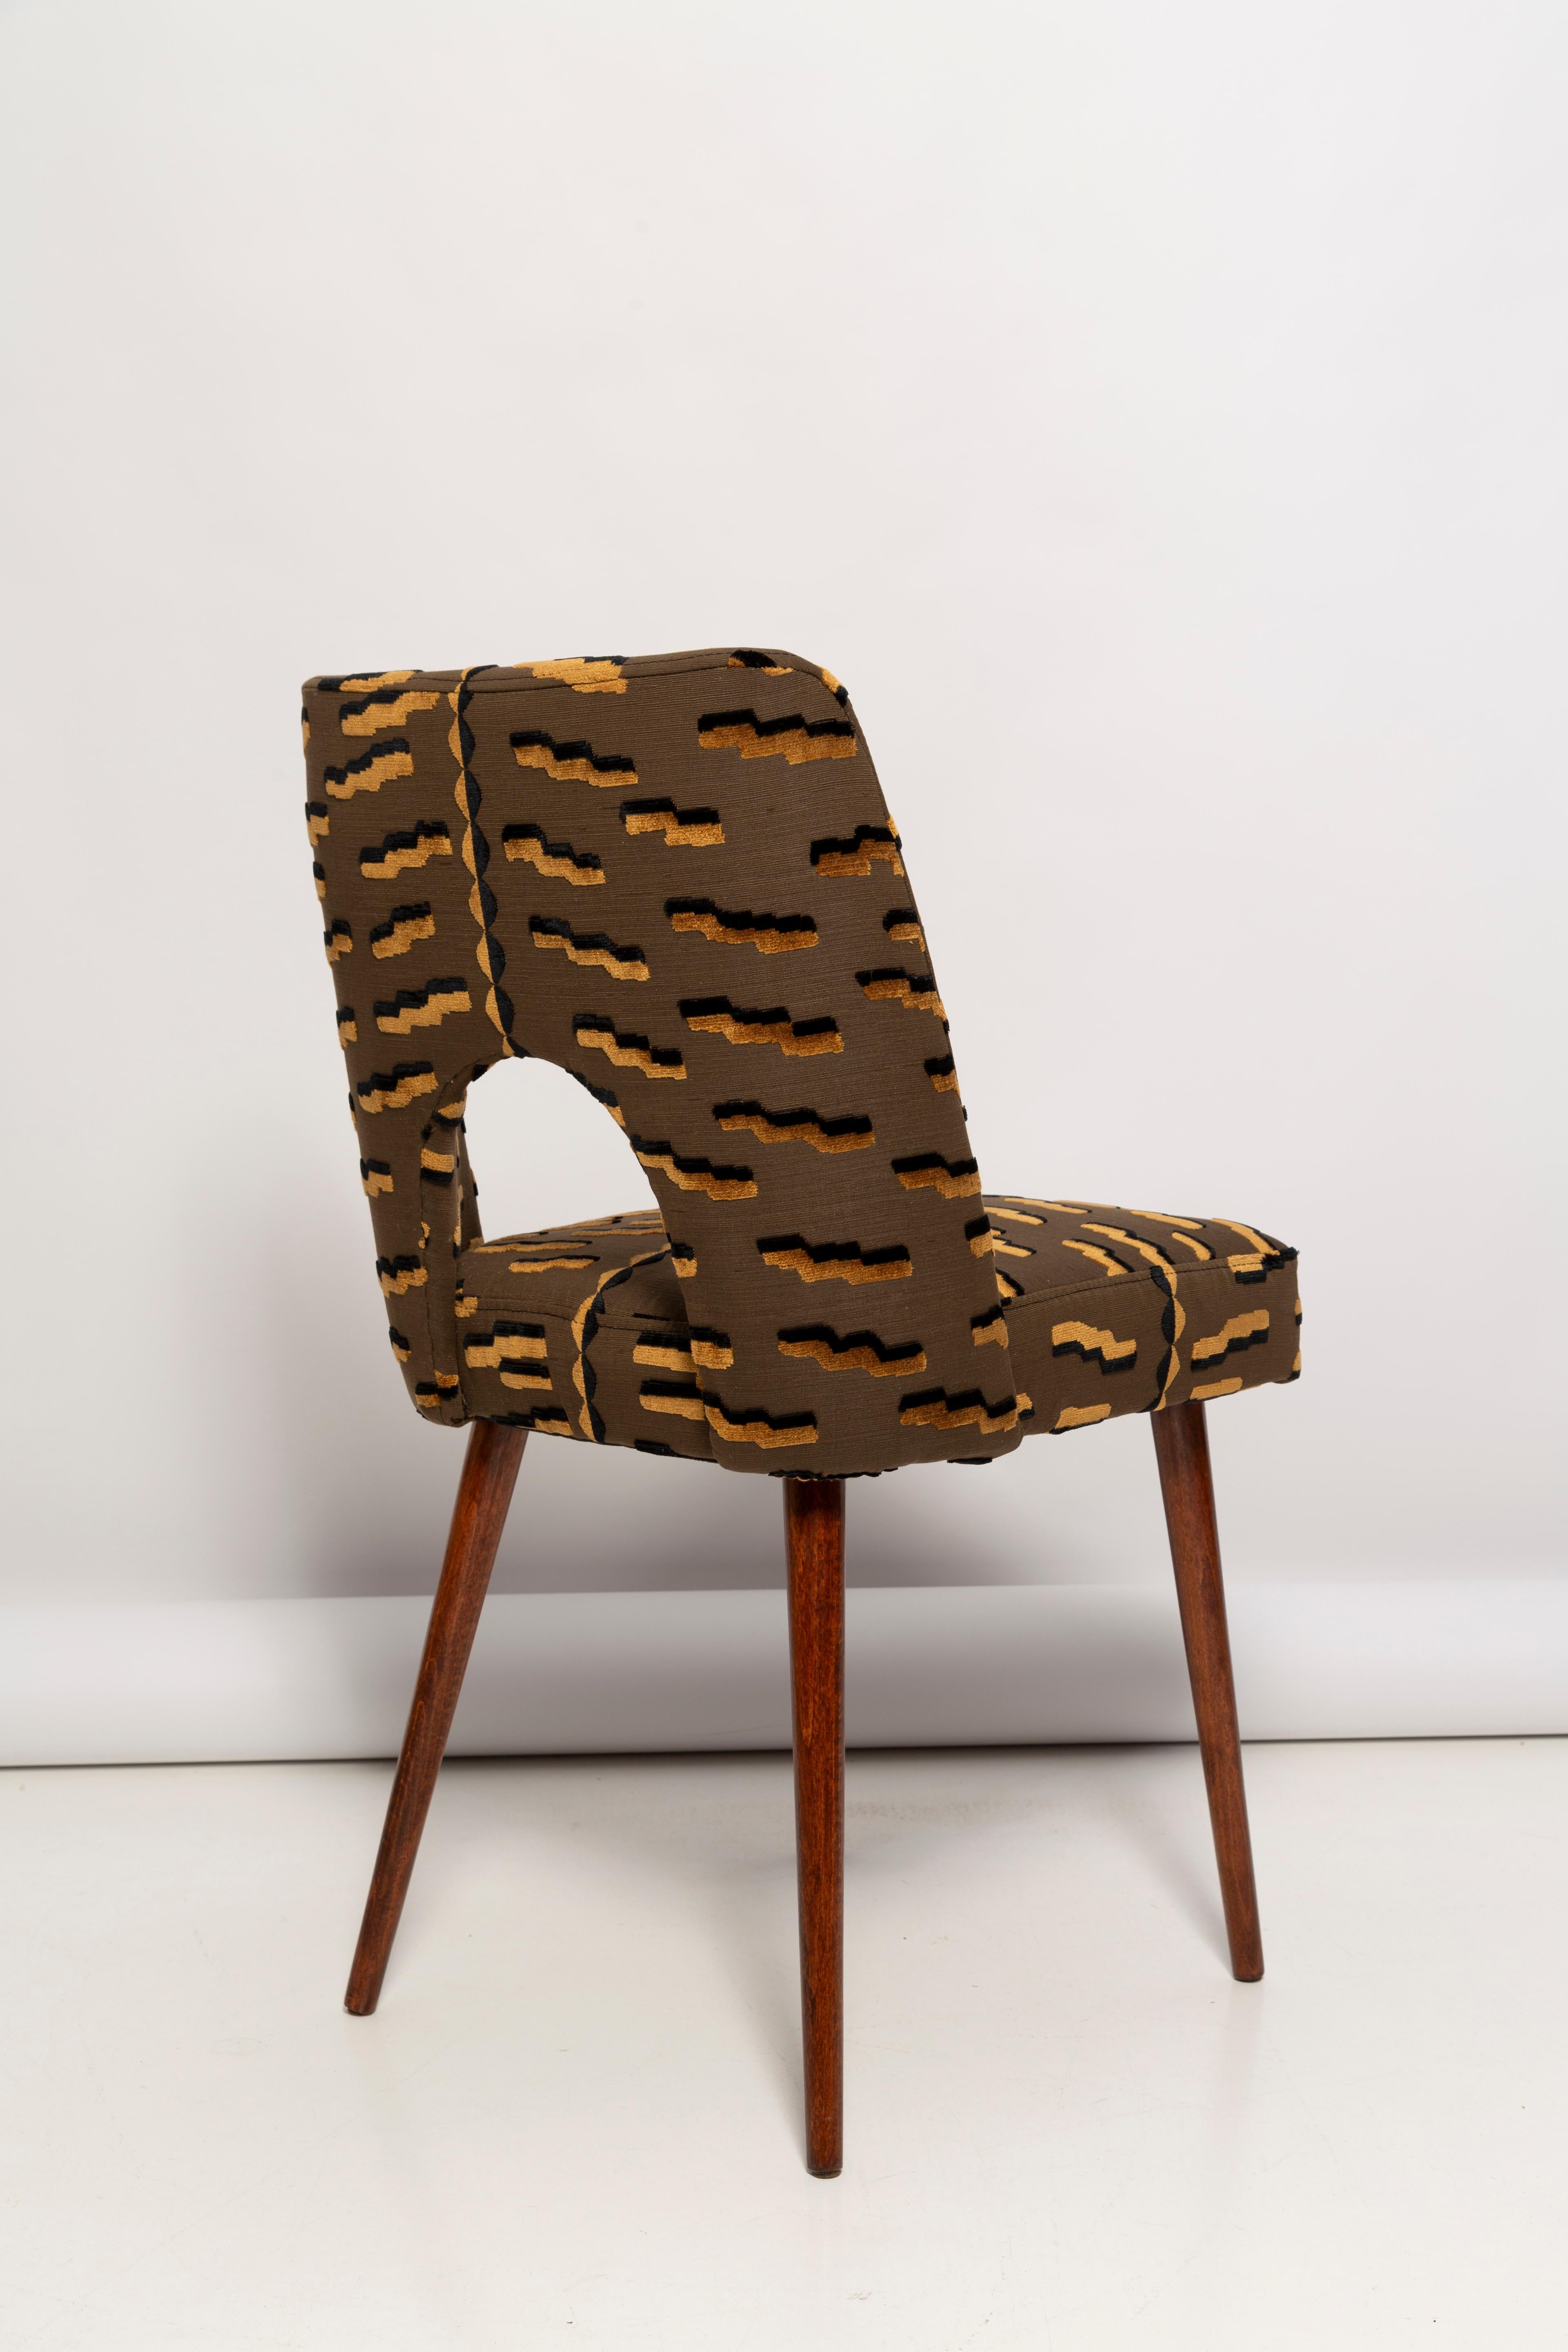 Set of Six Mid Century Brown Tiger Jacquard Velvet Shell Chairs, Europe, 1960s For Sale 3